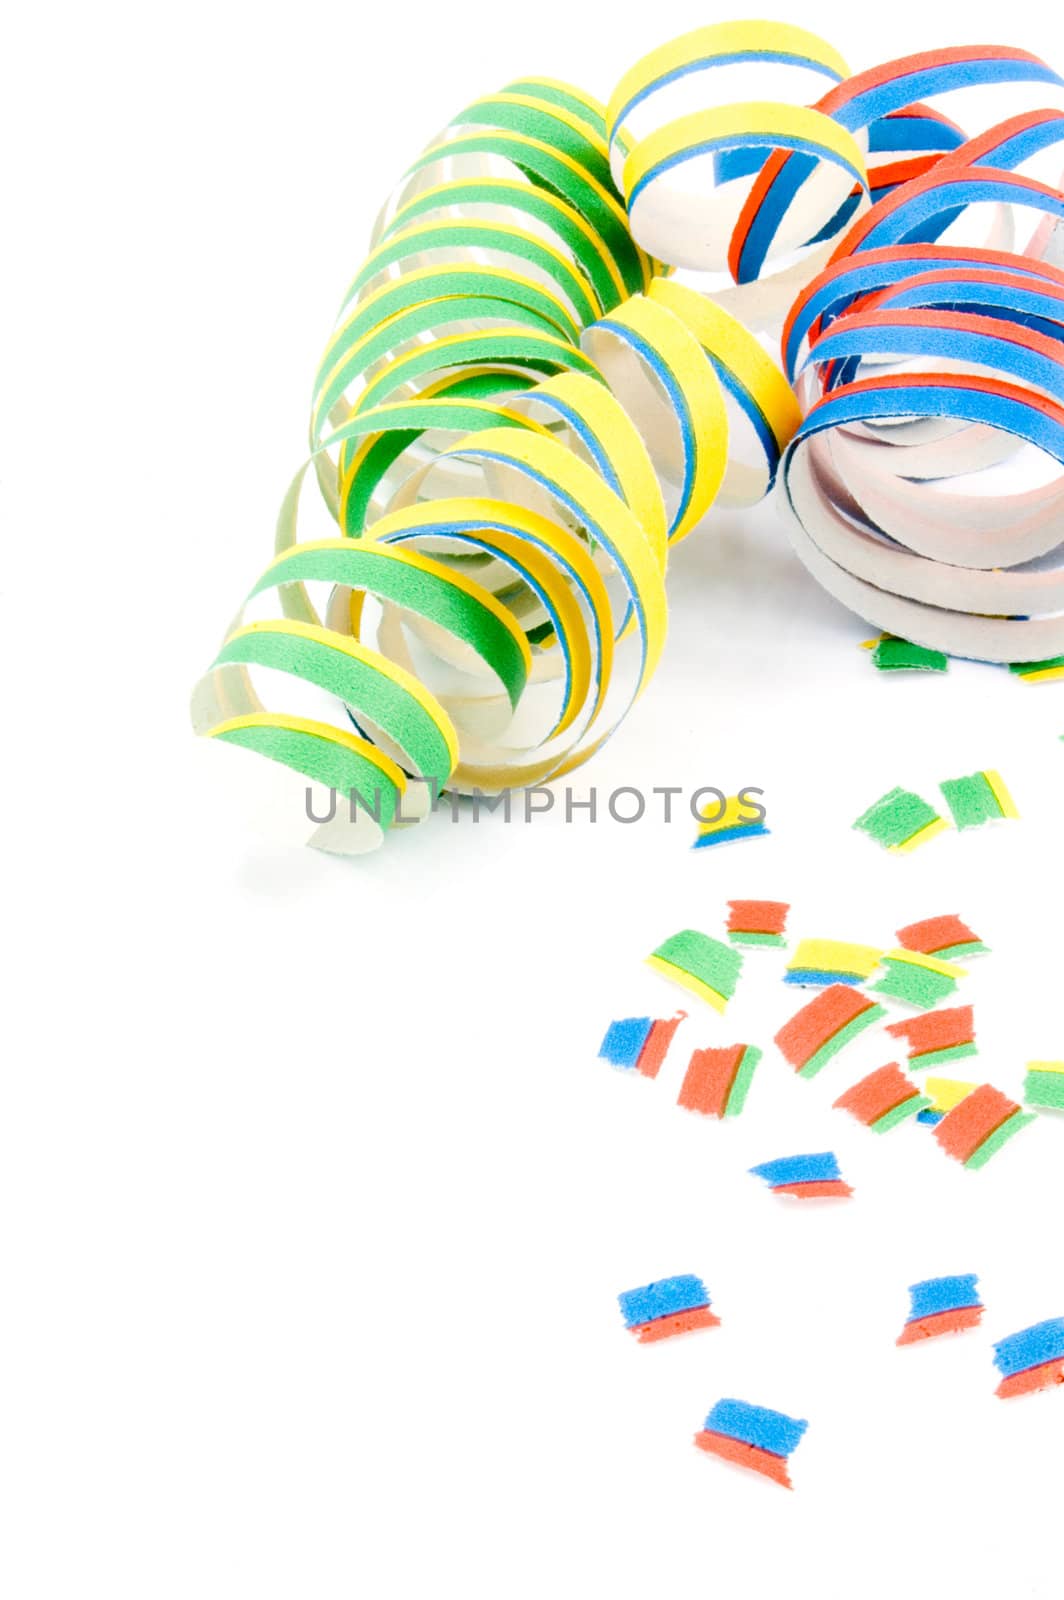 Colorful party streamers isolated on white background

